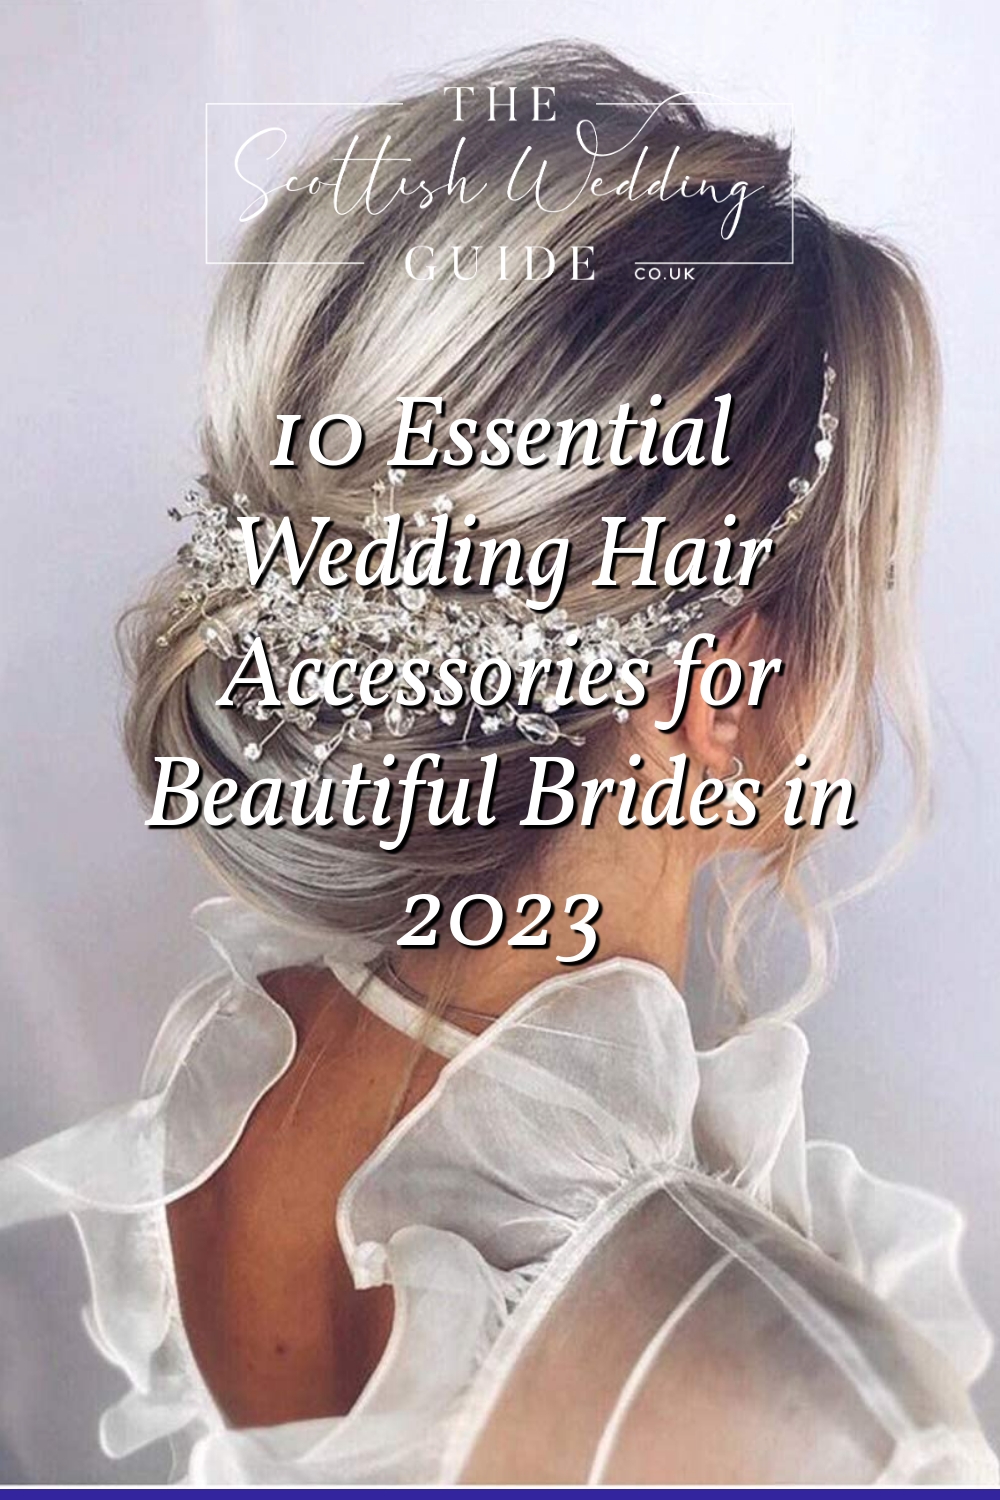 10 Essential Wedding Hair Accessories for Beautiful Brides in 2023